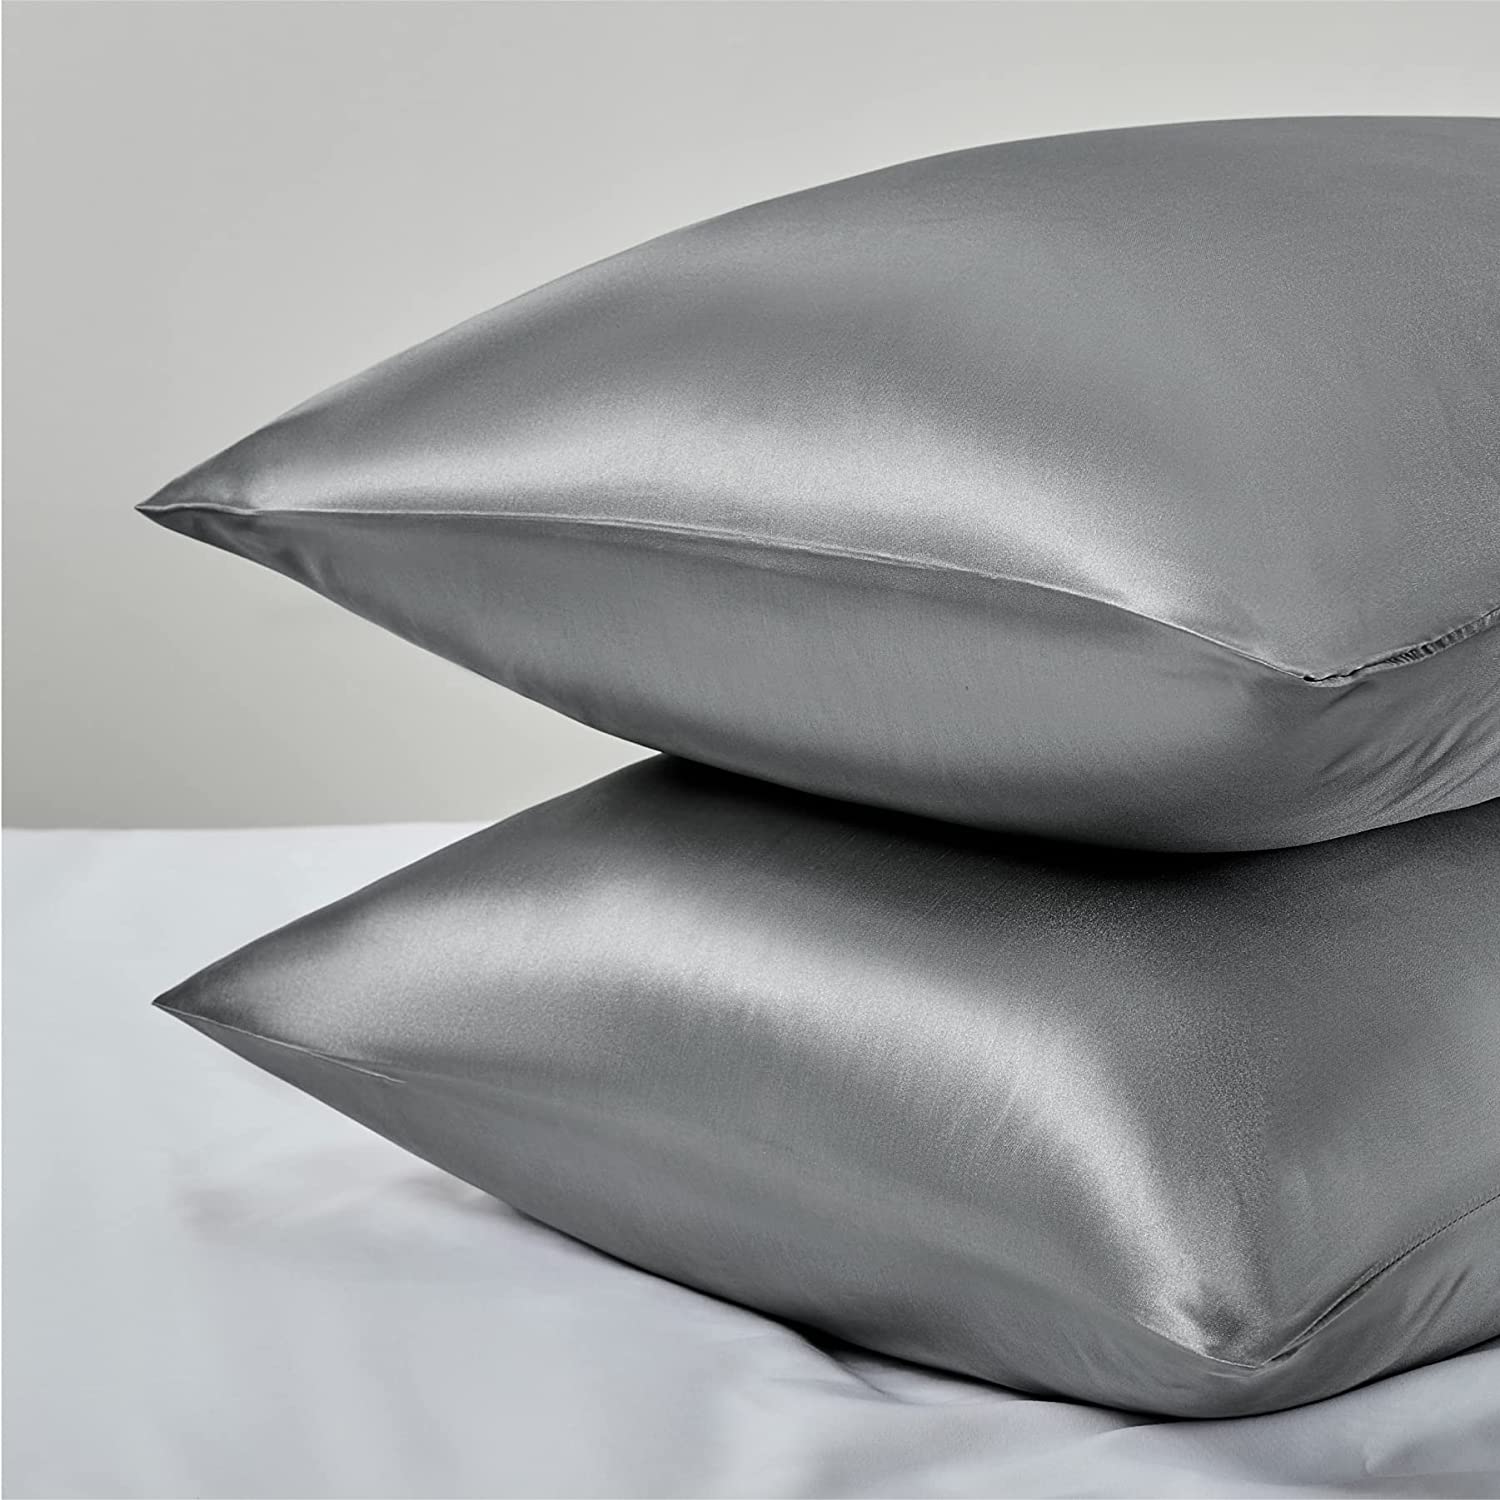 10 Best Silk Pillowcases For Hair And Skin: Our Top Picks Of 2023